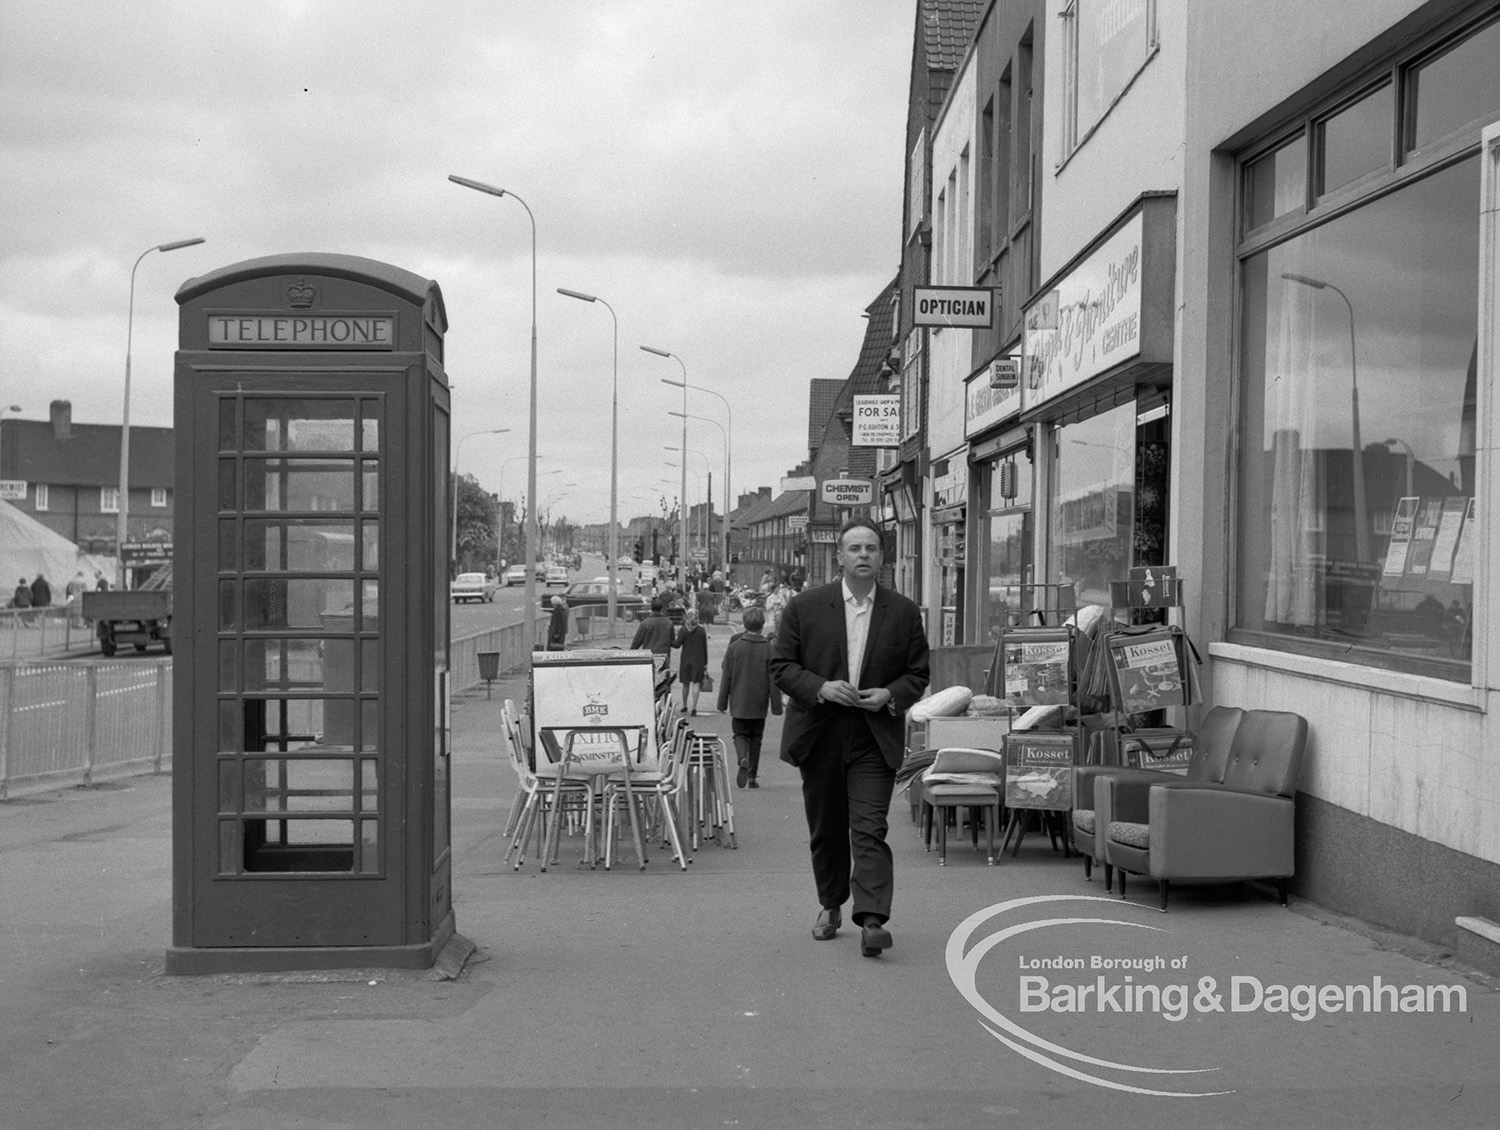 London Borough Of Barking Shops Act Inspector Showing Furniture Obstructing Pavement At 274 Heathway Dagenham Looking North With Owner Approaching 1969 Barking And Dagenham Archive Photos